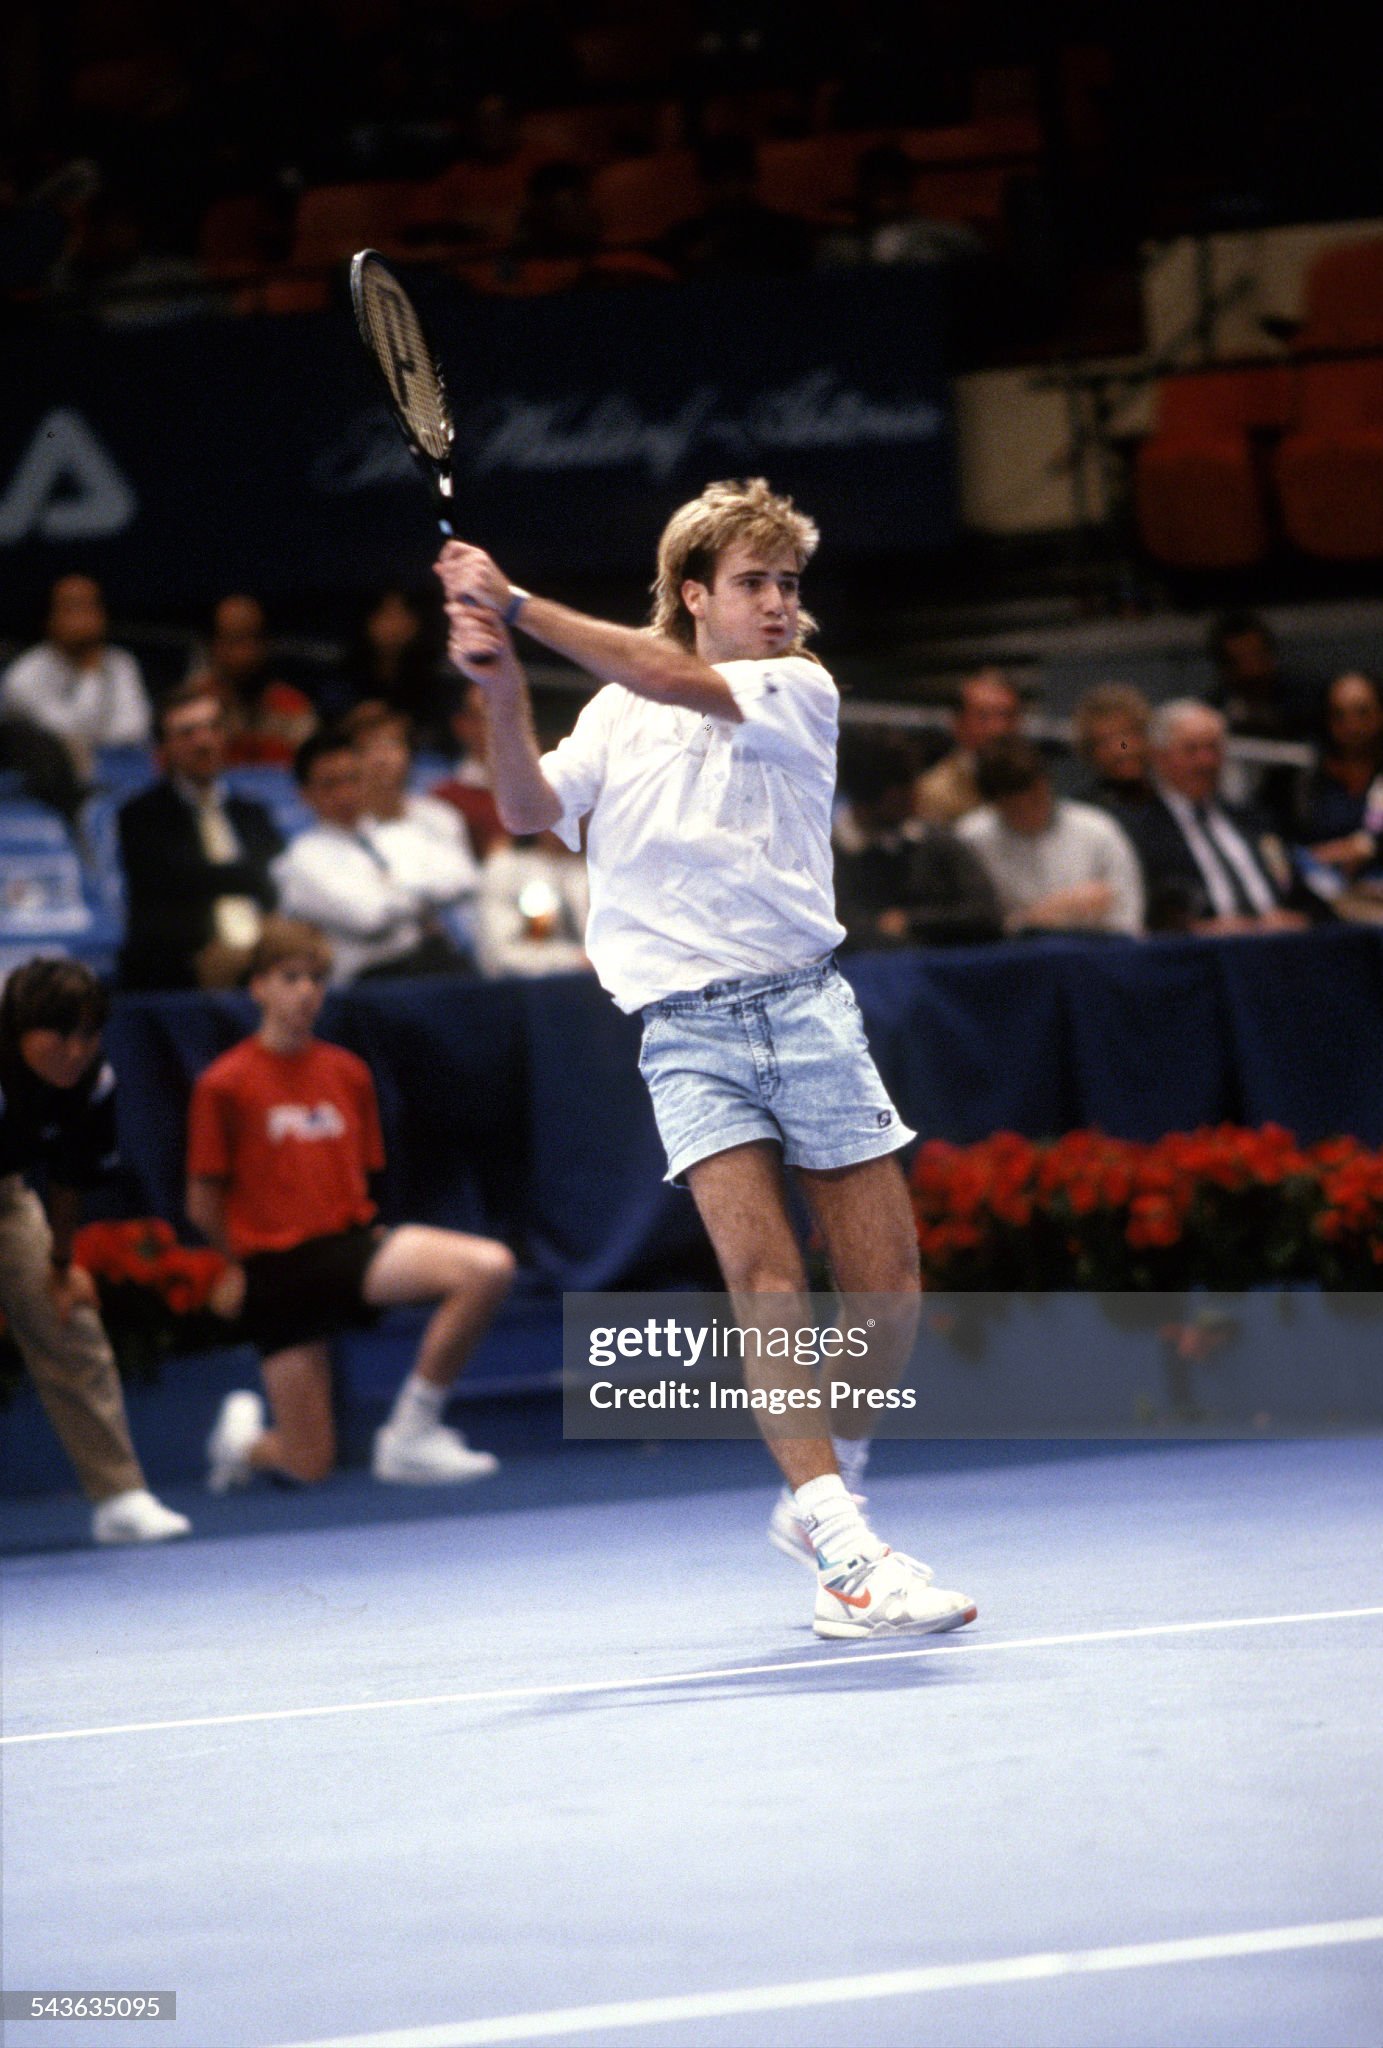 ANDRÉ AGASSI F-r-9ZVWoAAB919?format=jpg&name=large